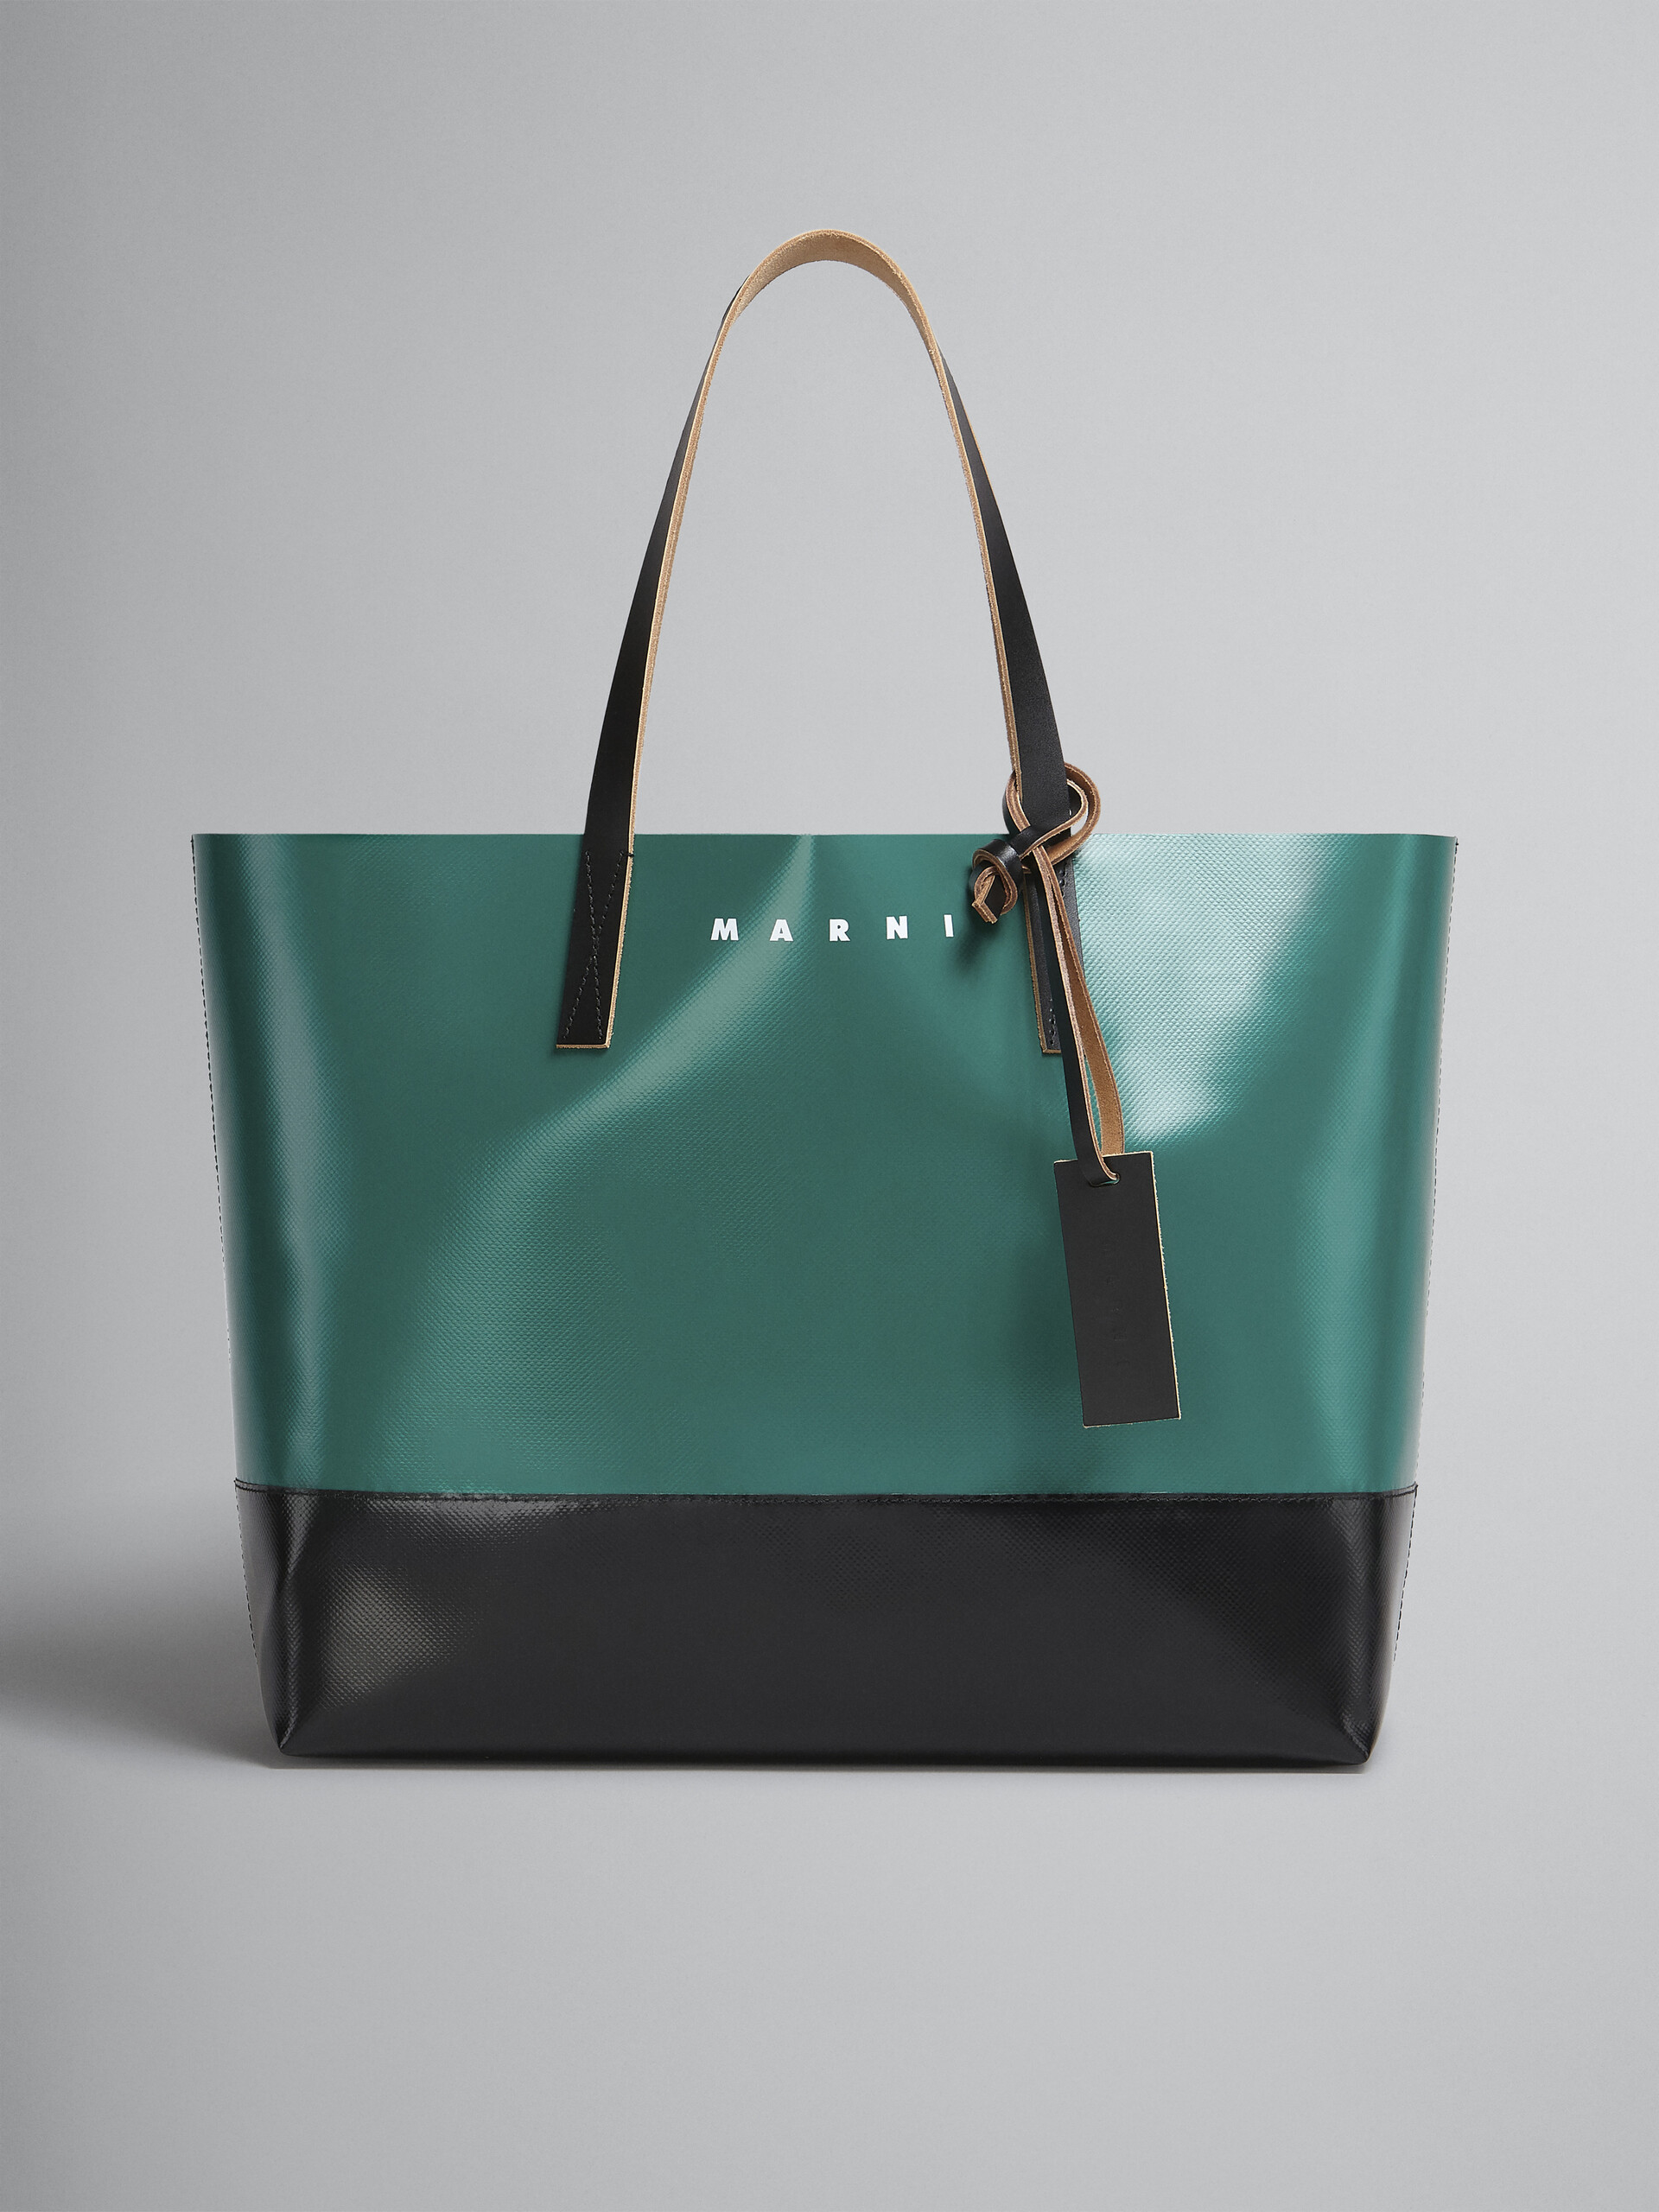 Tribeca shopping bag in blue and black - Shopping Bags - Image 1